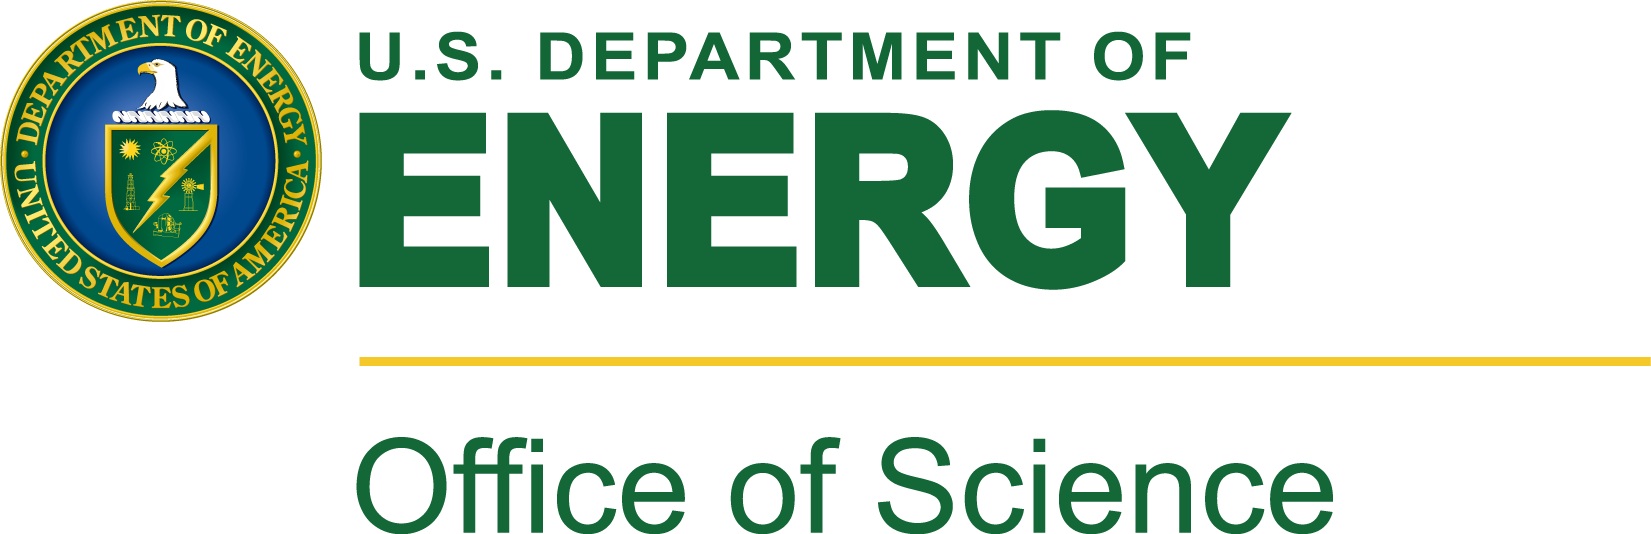 Department of Energy Office of Science